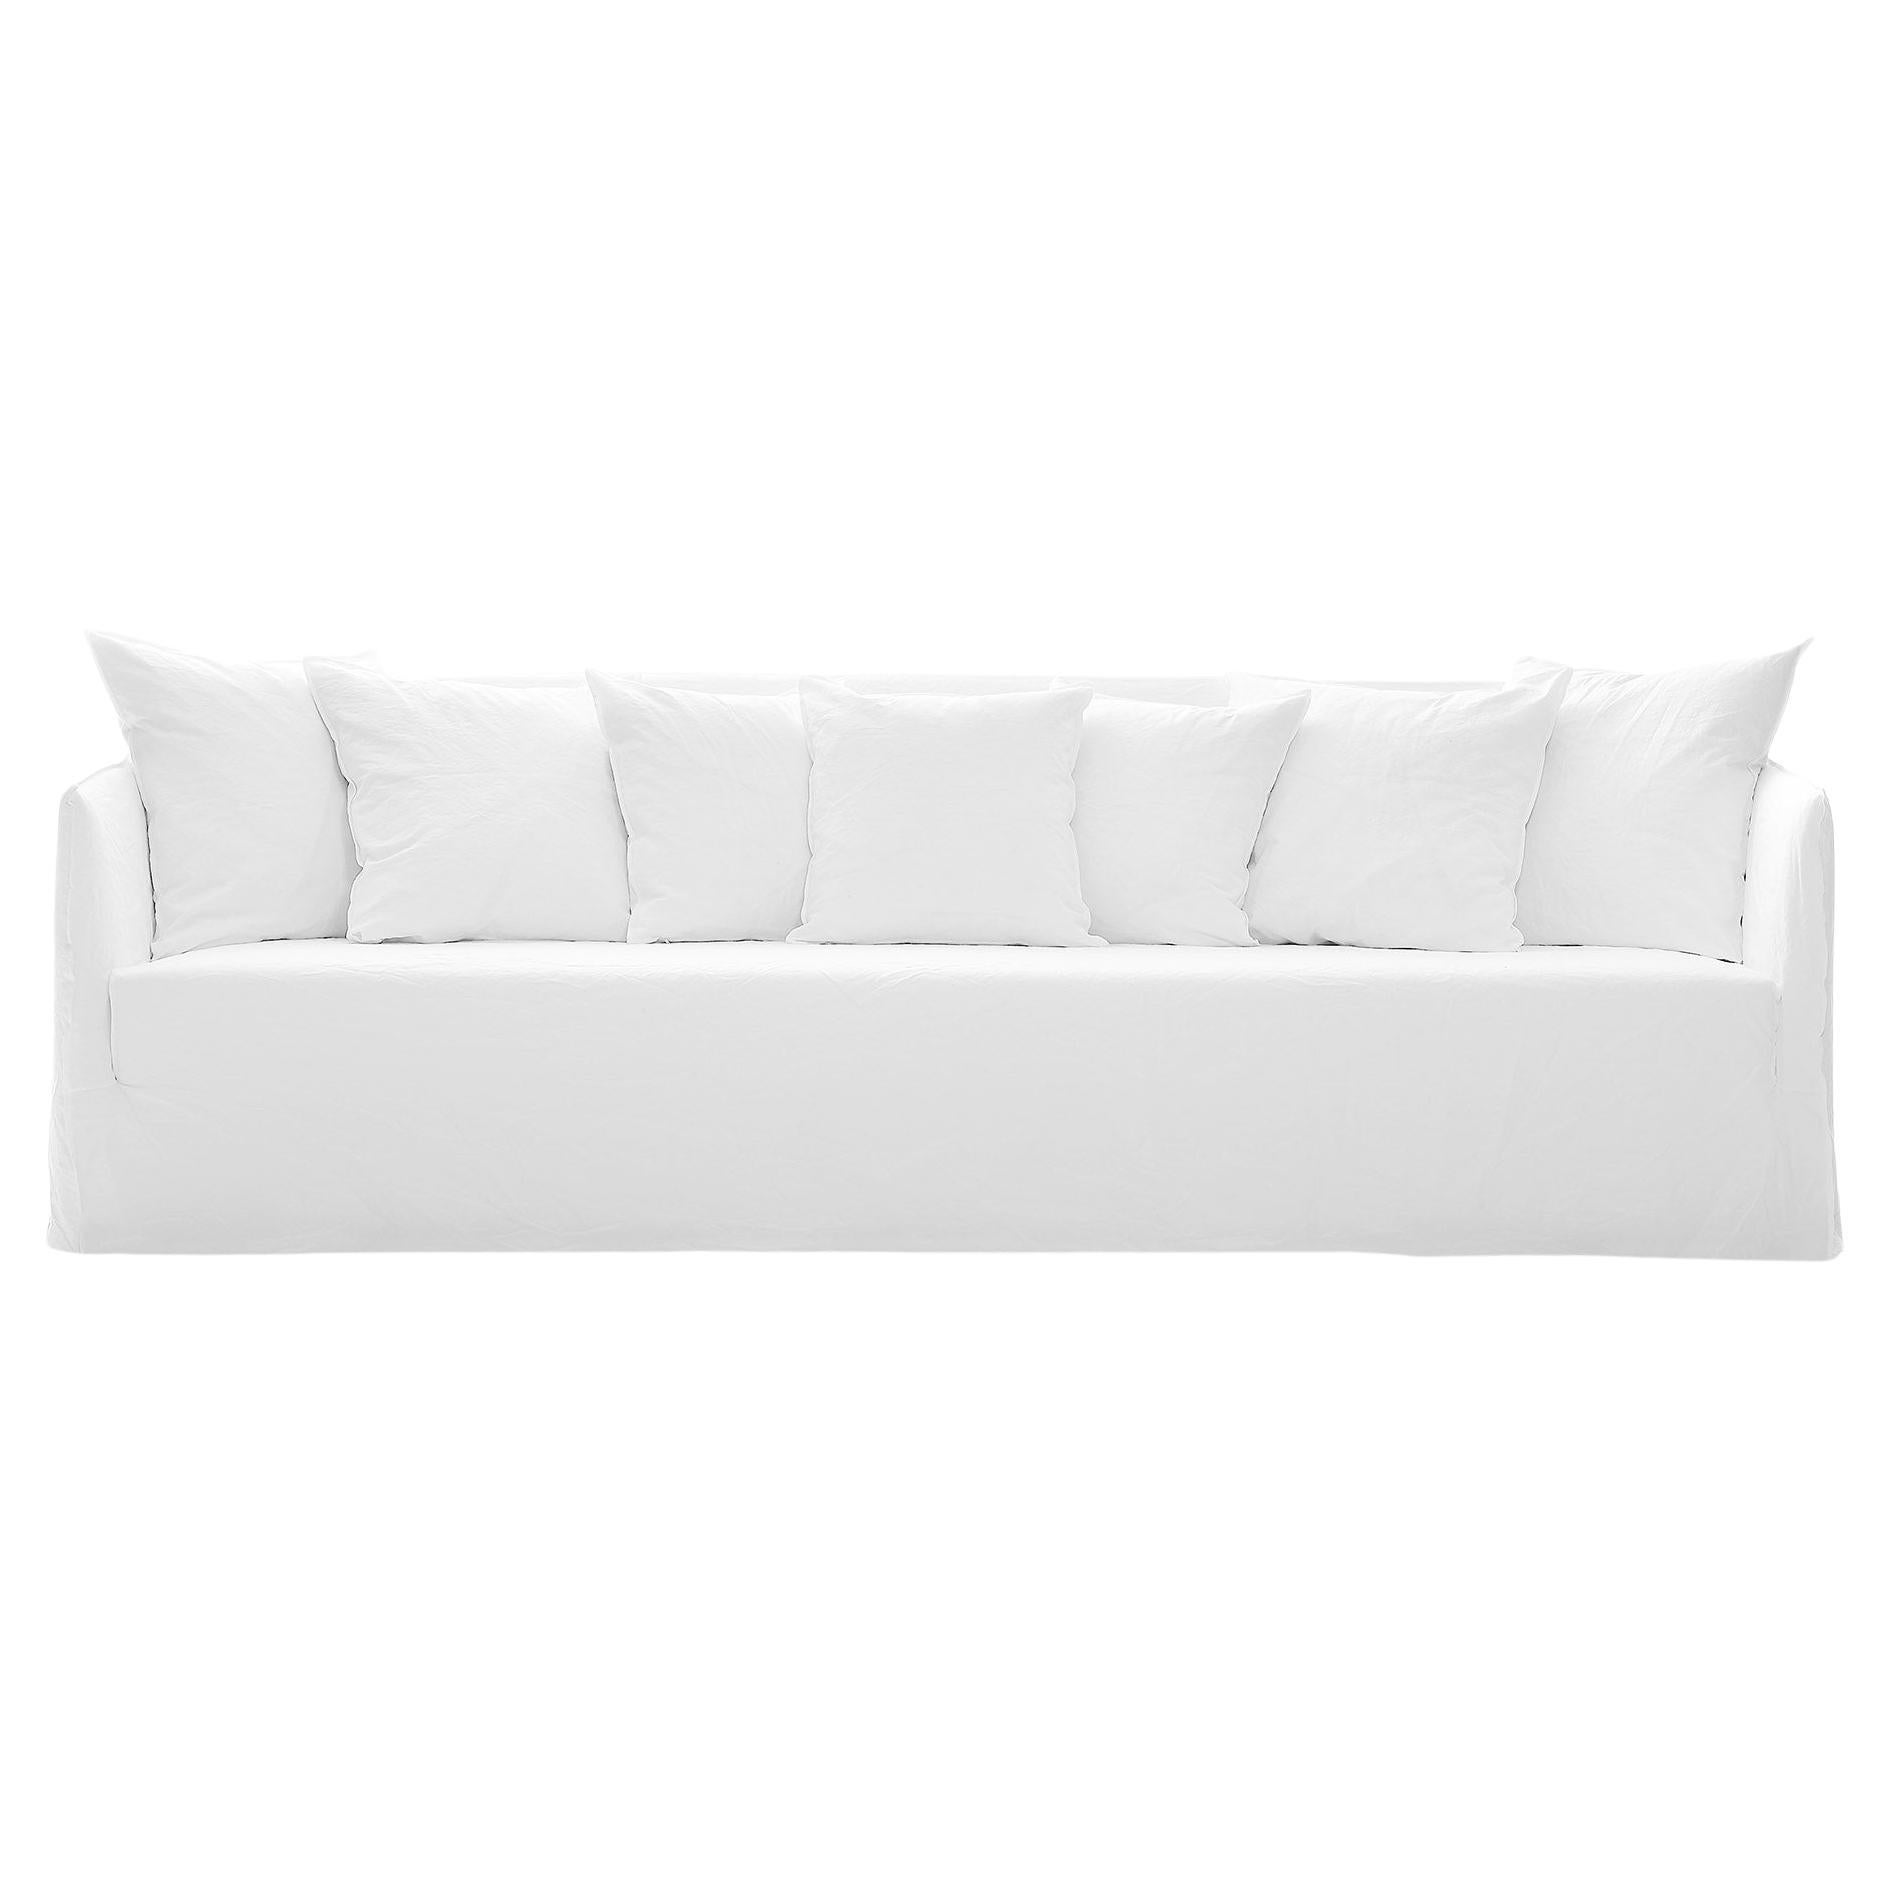 Gervasoni Ghost 14 Sofa in White Linen Upholstery by Paola Navone